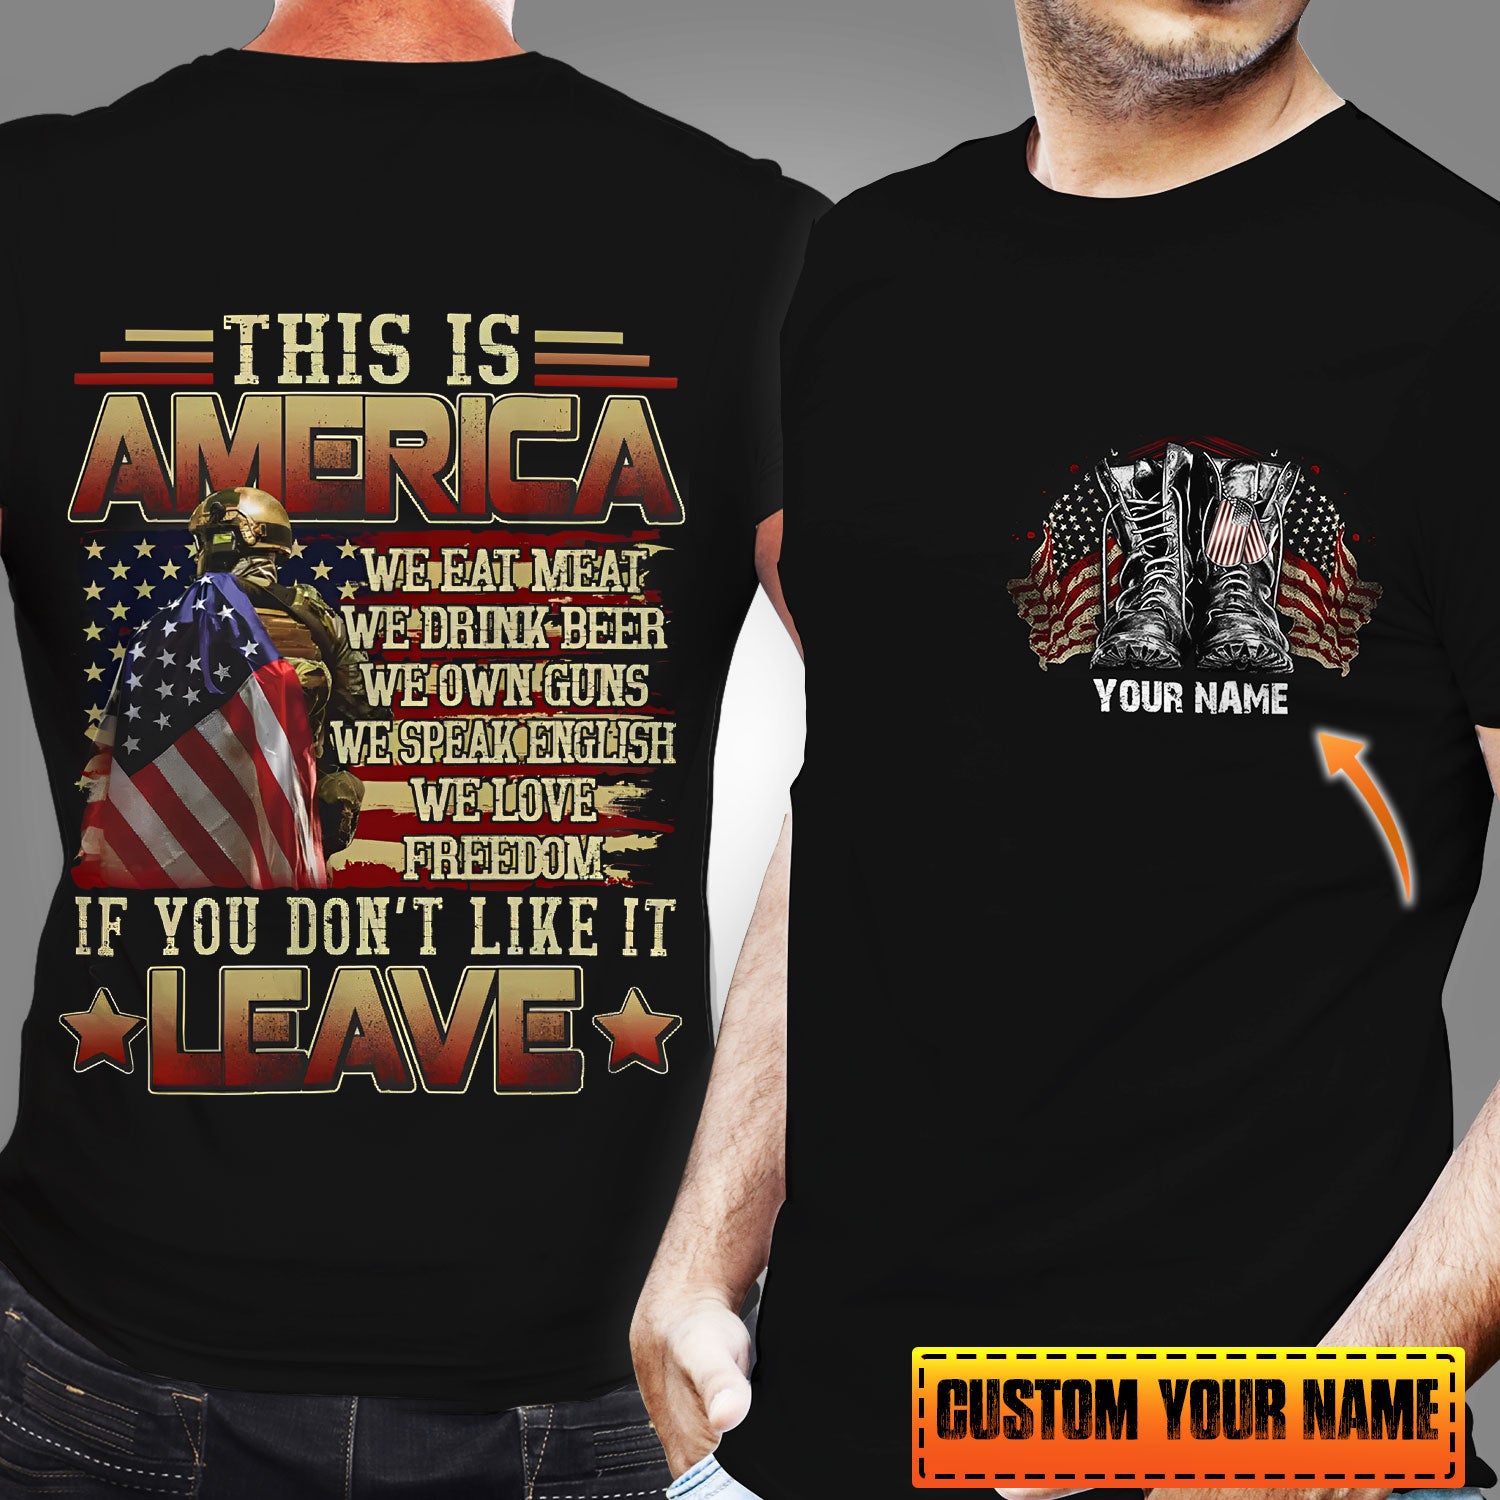 Bold & Free: Personalized U.S Veteran T-Shirt, Gift For Veterans - A Salute to Freedom